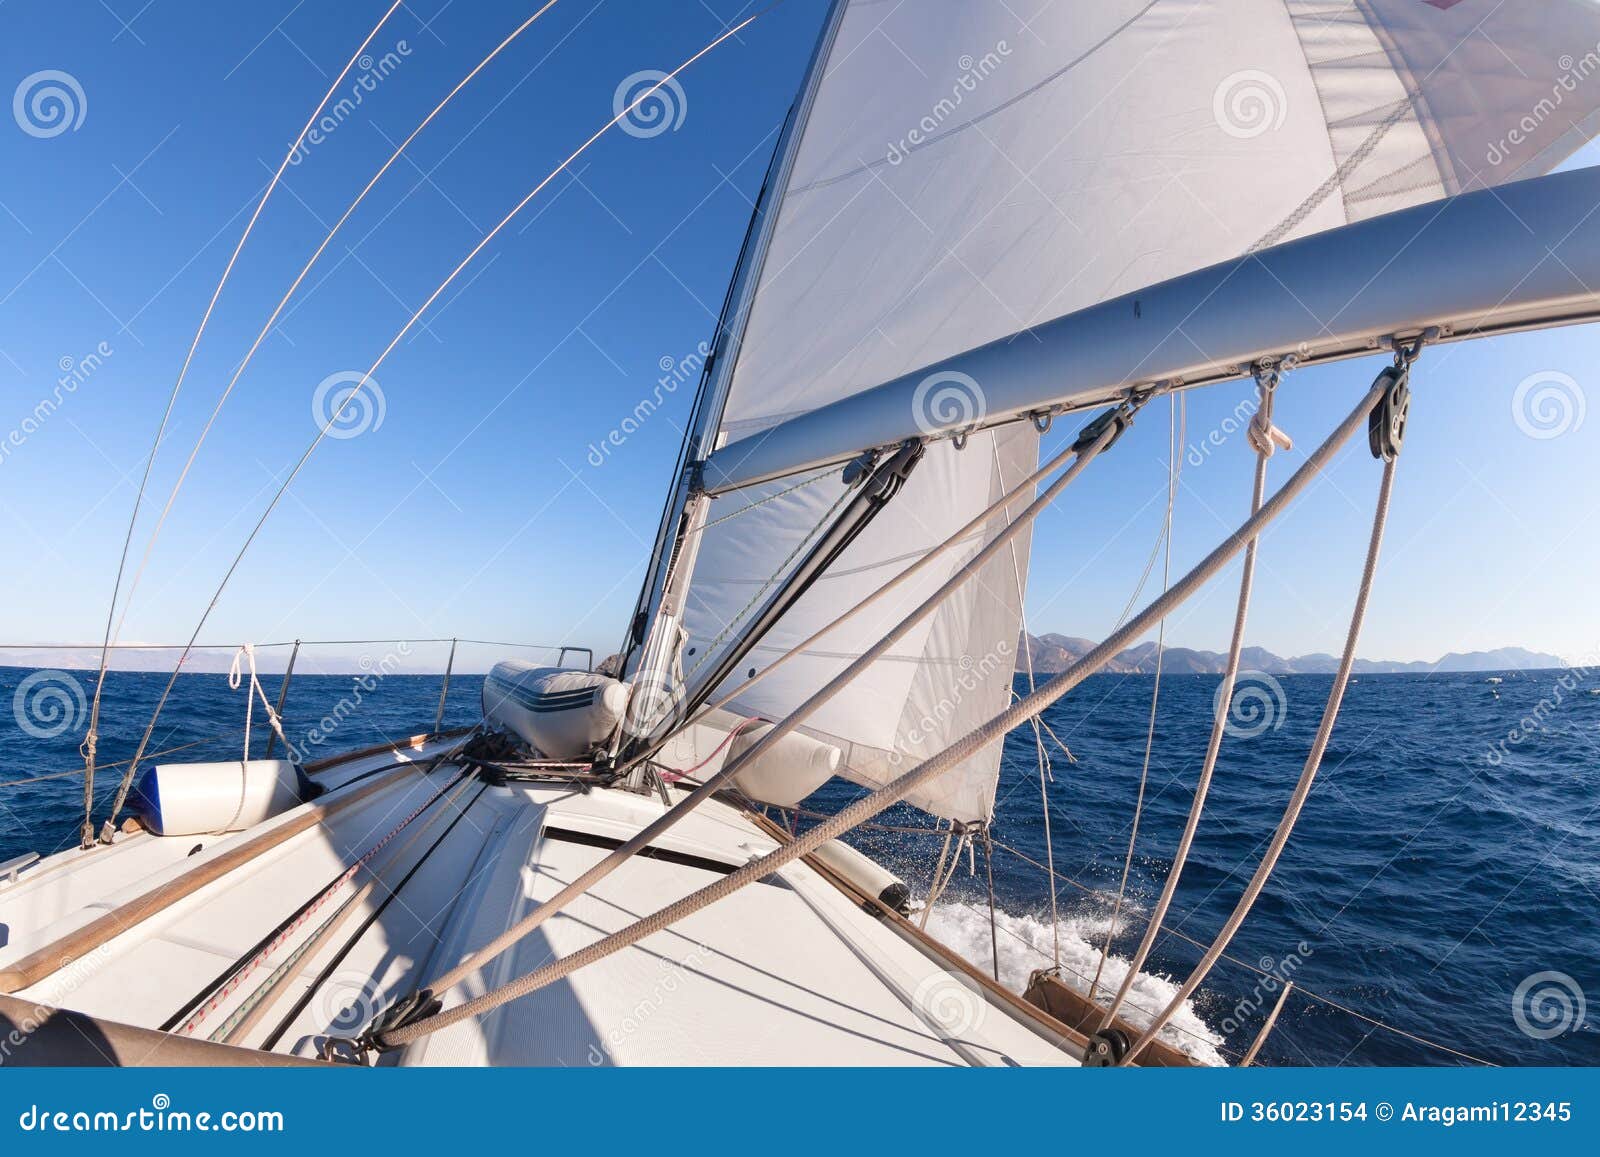 sailing boat deck in the sea